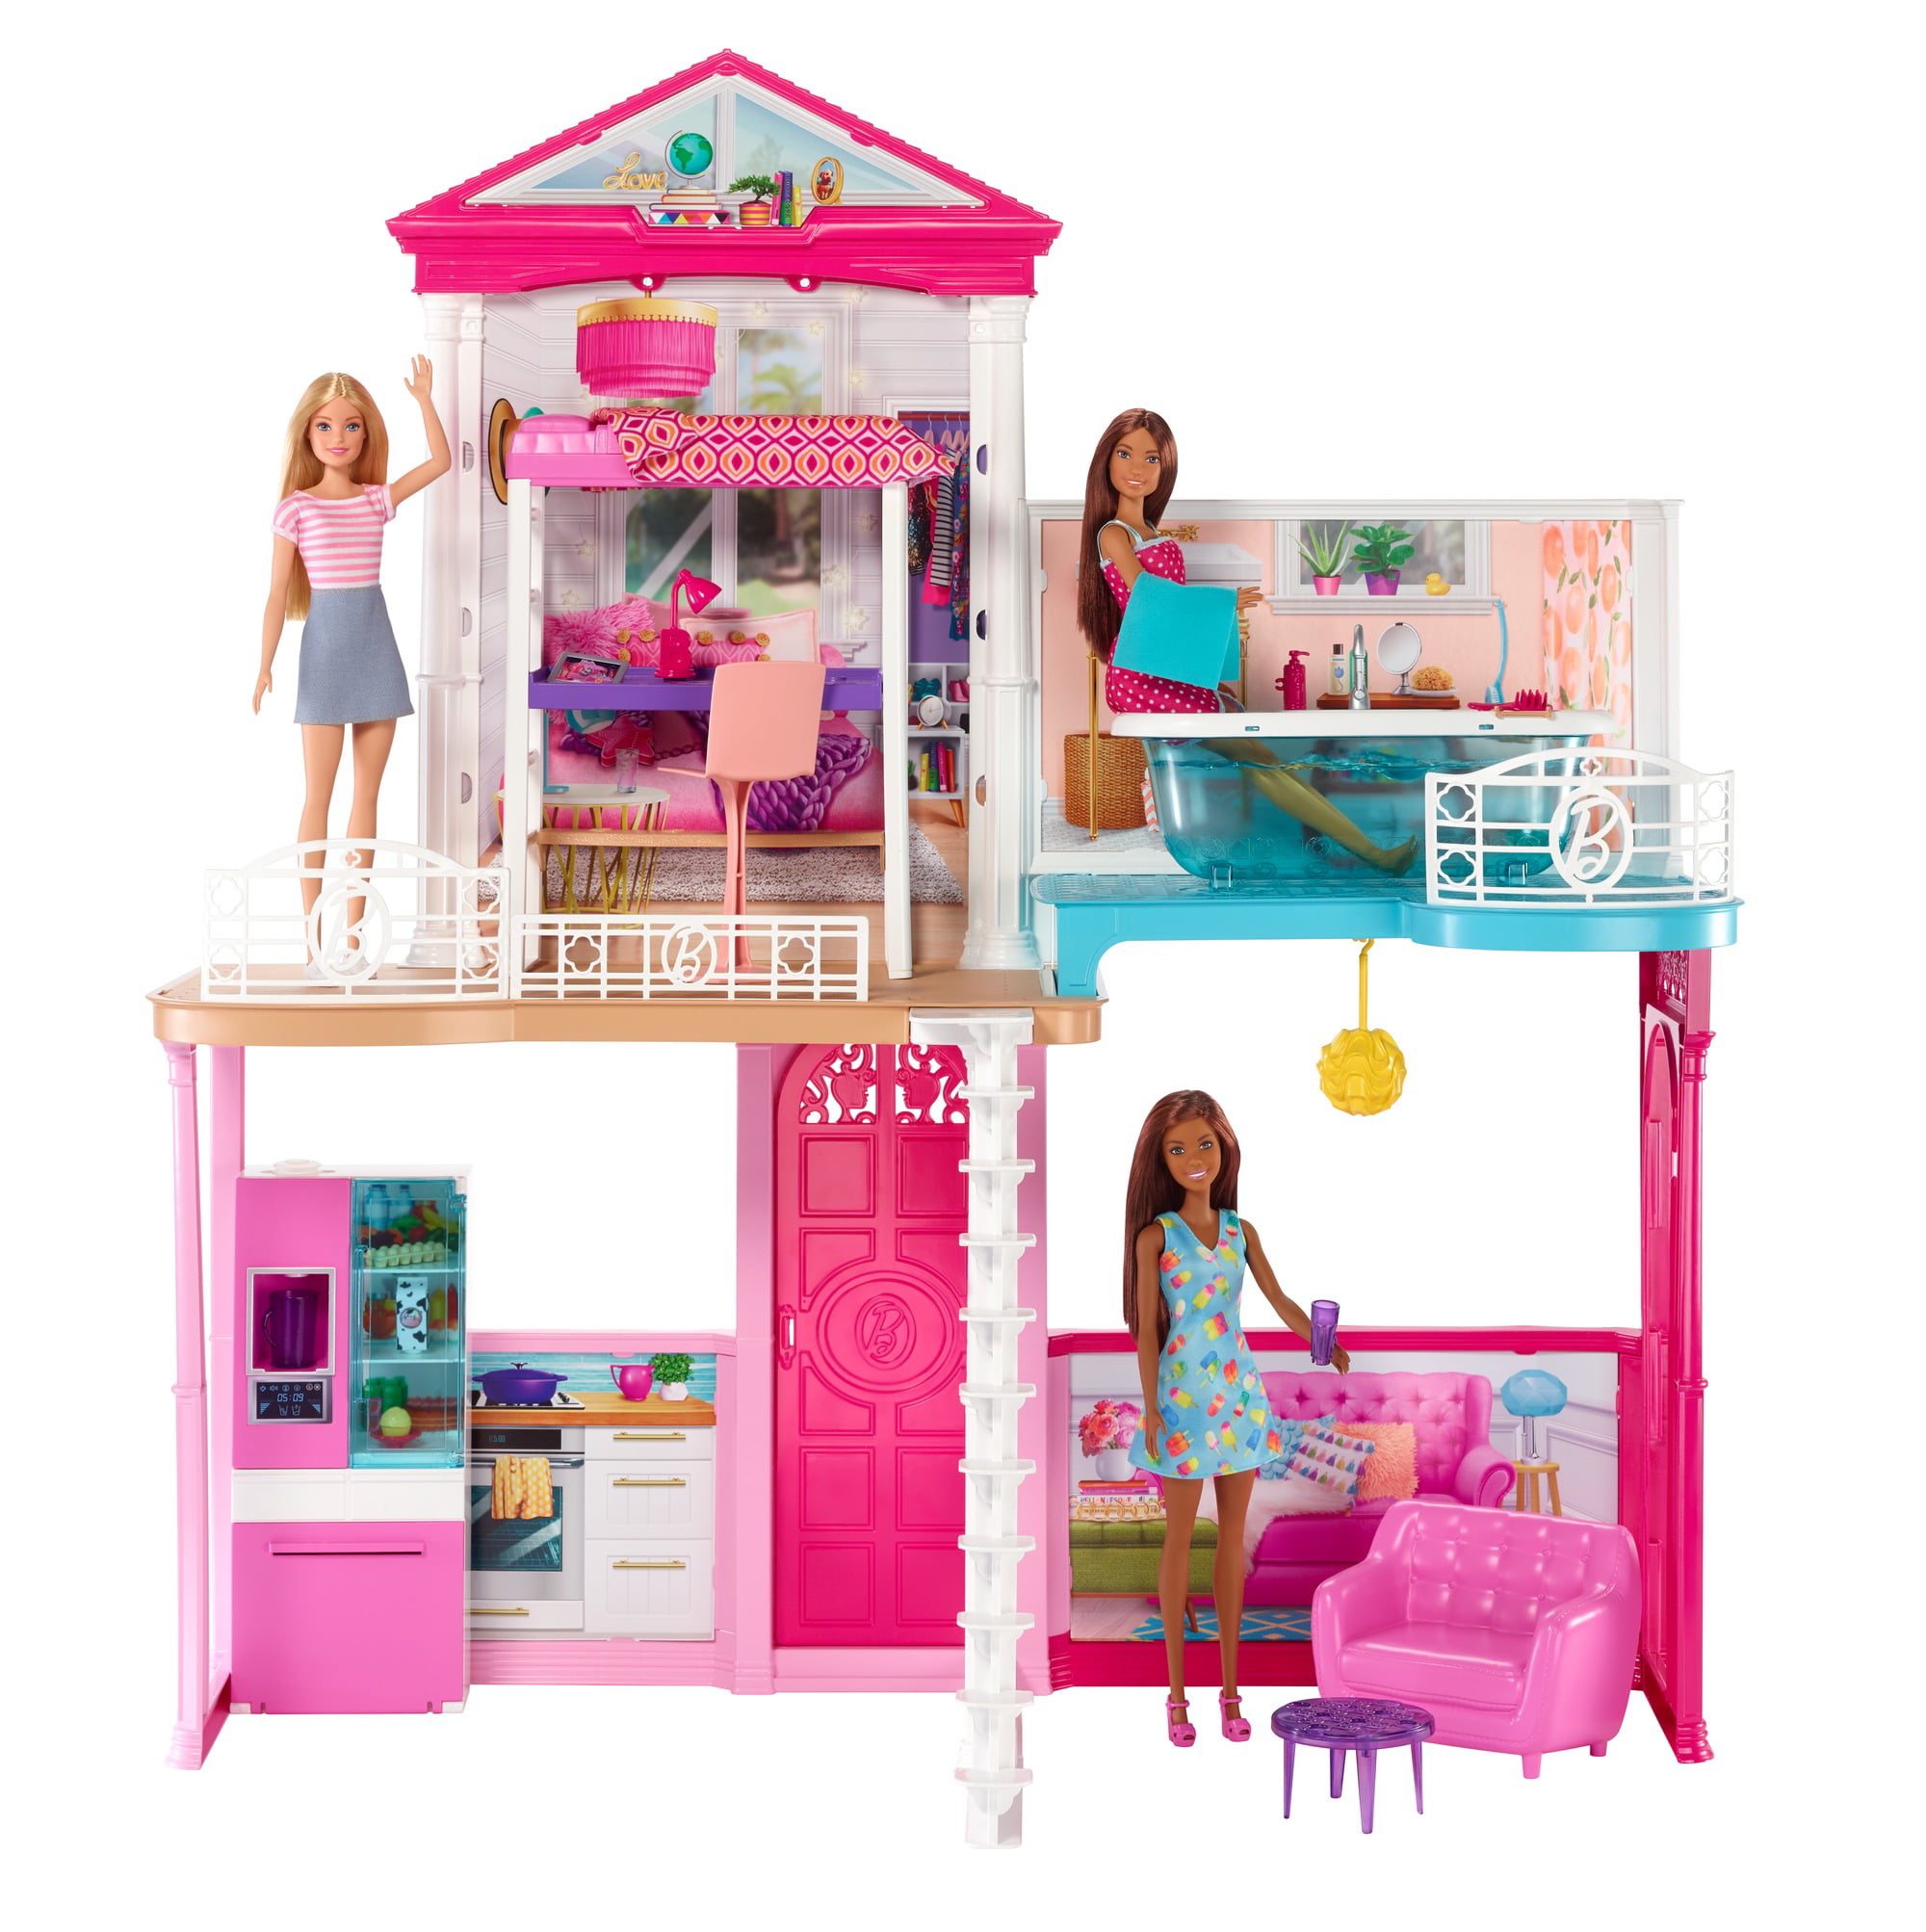 Details about   Barbie House 1-Story Dream Furniture Accessories Dollhouse Girls Fun Play 